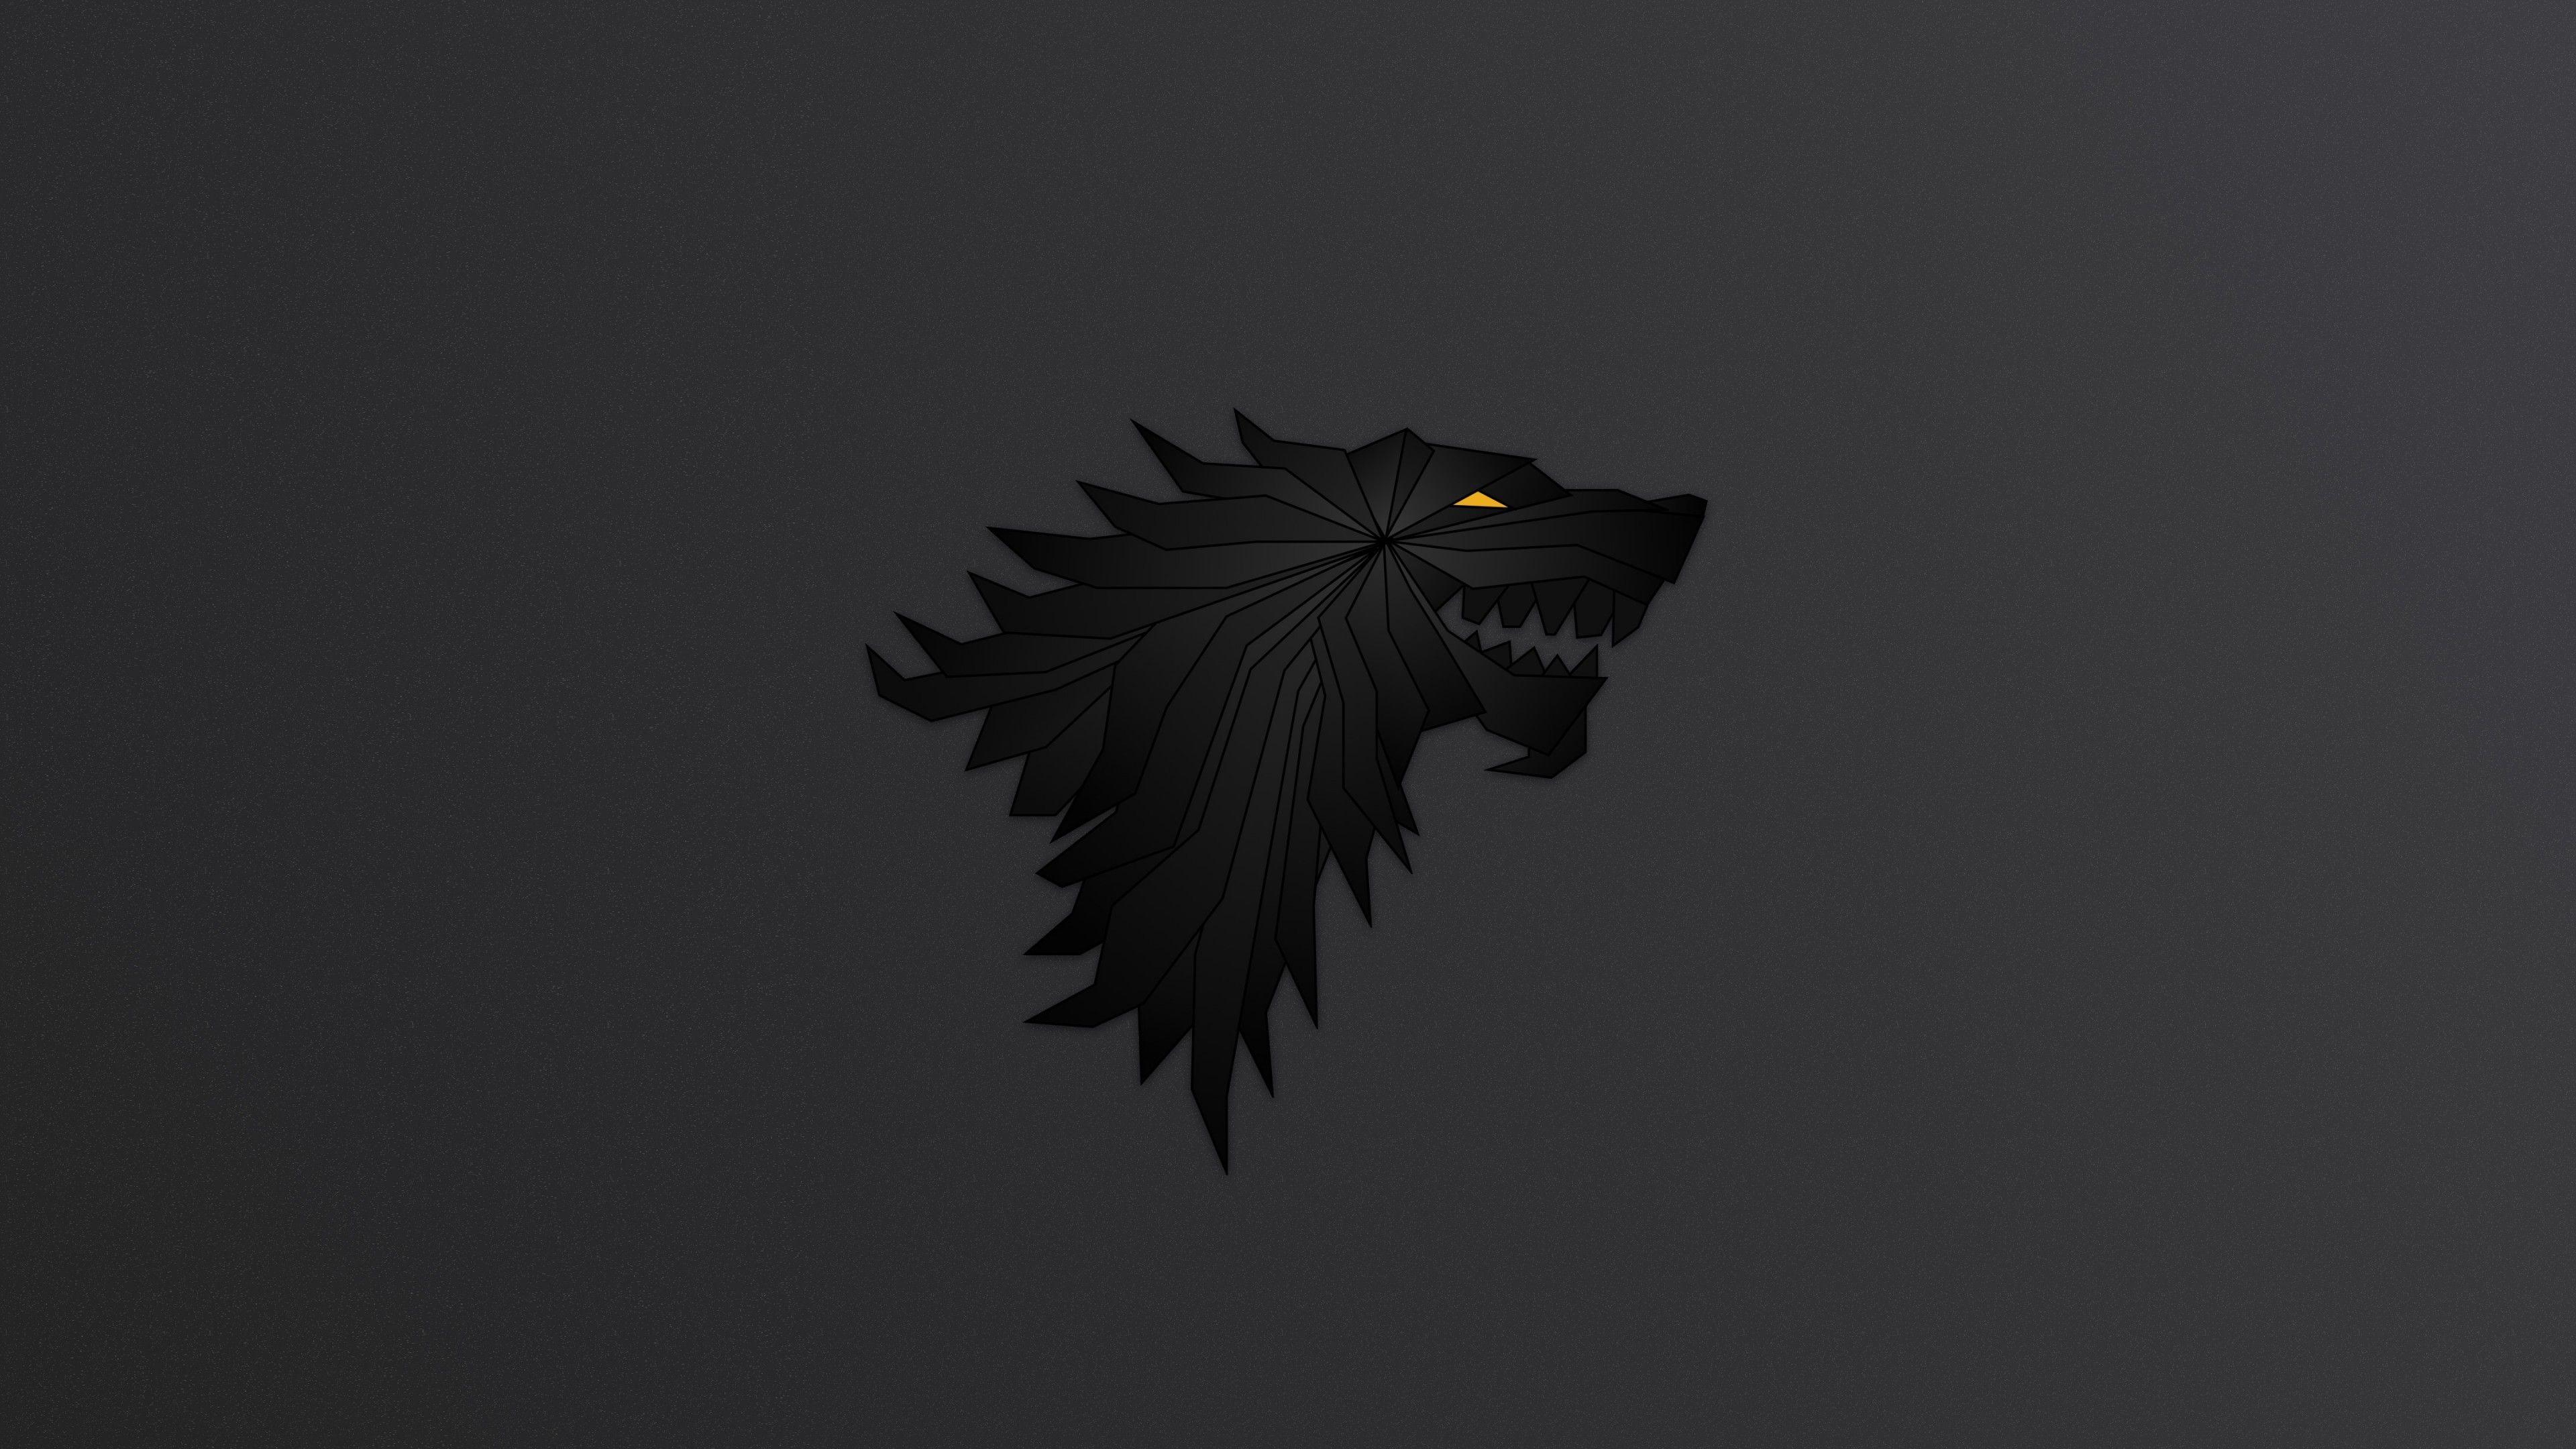 1312x787 / house stark wallpaper free hd widescreen - Coolwallpapers.me!